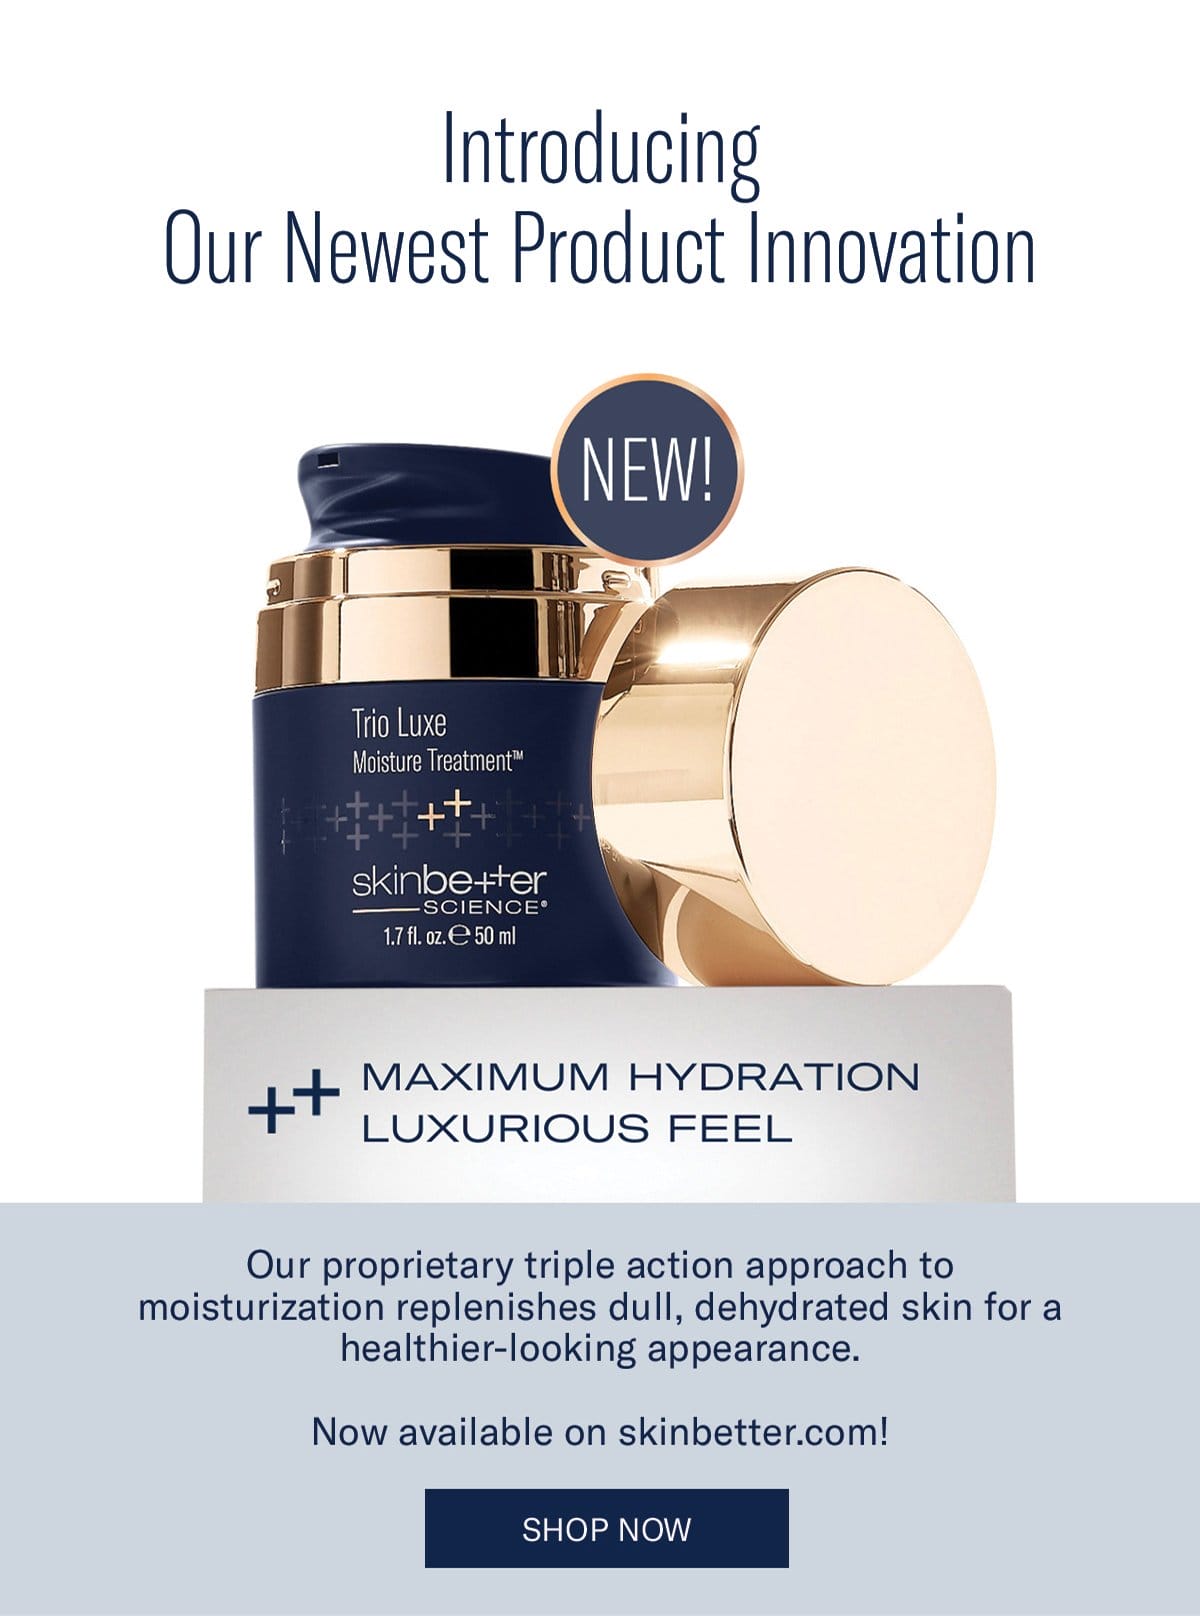 Introducing Trio Luxe Moisture Treatment NOW AVAILABLE ON SKINBETTER.COM